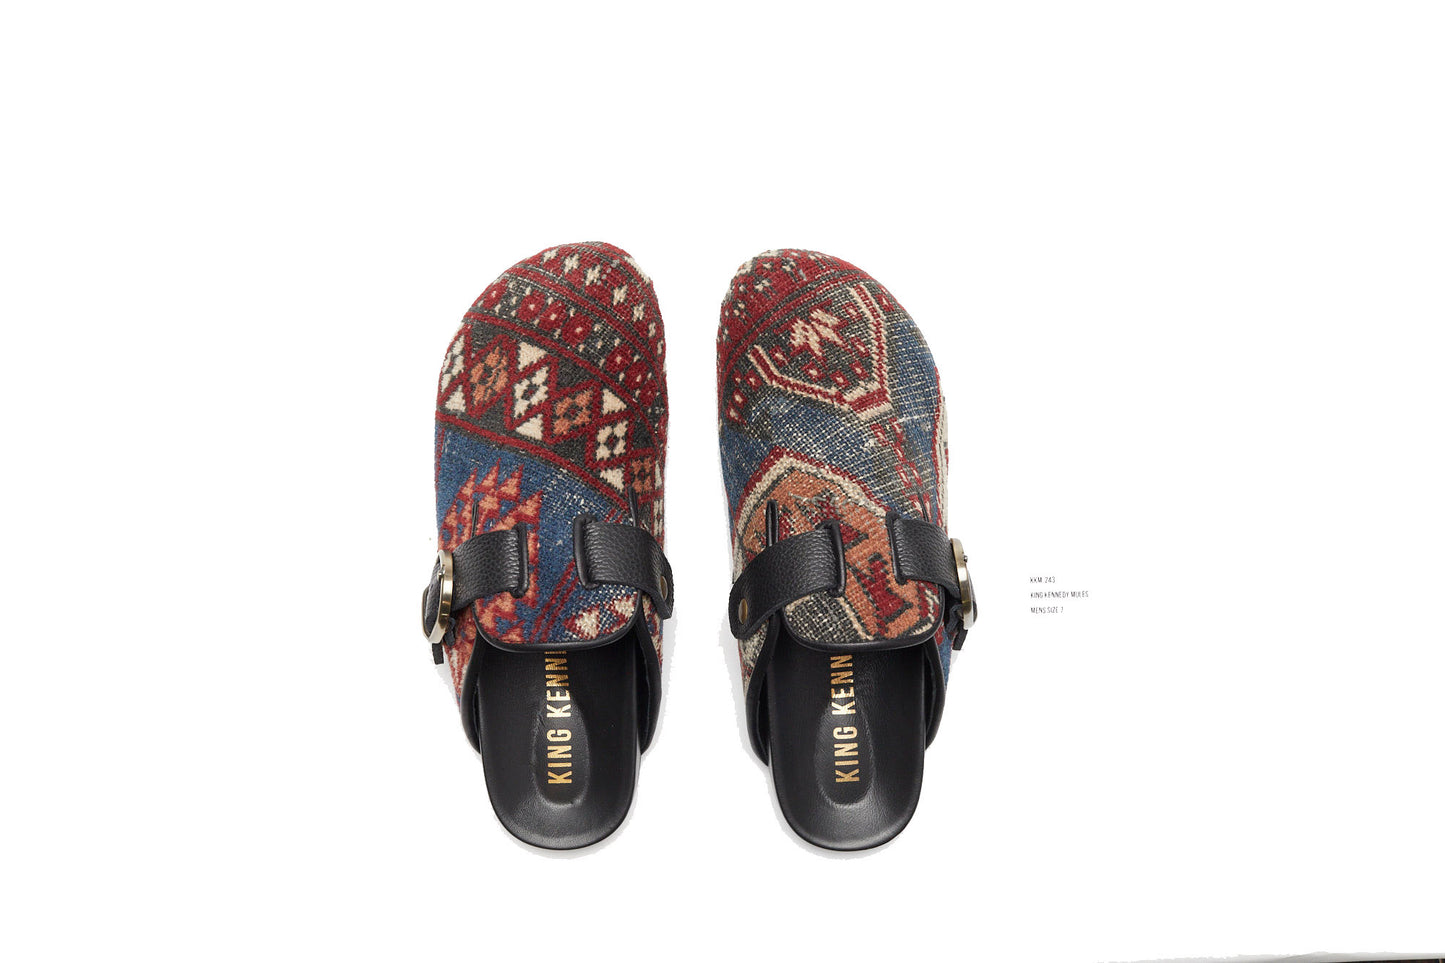 King Kennedy Rug Mules are one-of-a-kind and made of 100 year old antique Persian rug fragments with soft lambskin footbed and rubber sole. This pair is made of an antique Persian rug in pale blue with red, cream, tan and grey designs throughout. Similar in shape to the birkenstock boston clog. 